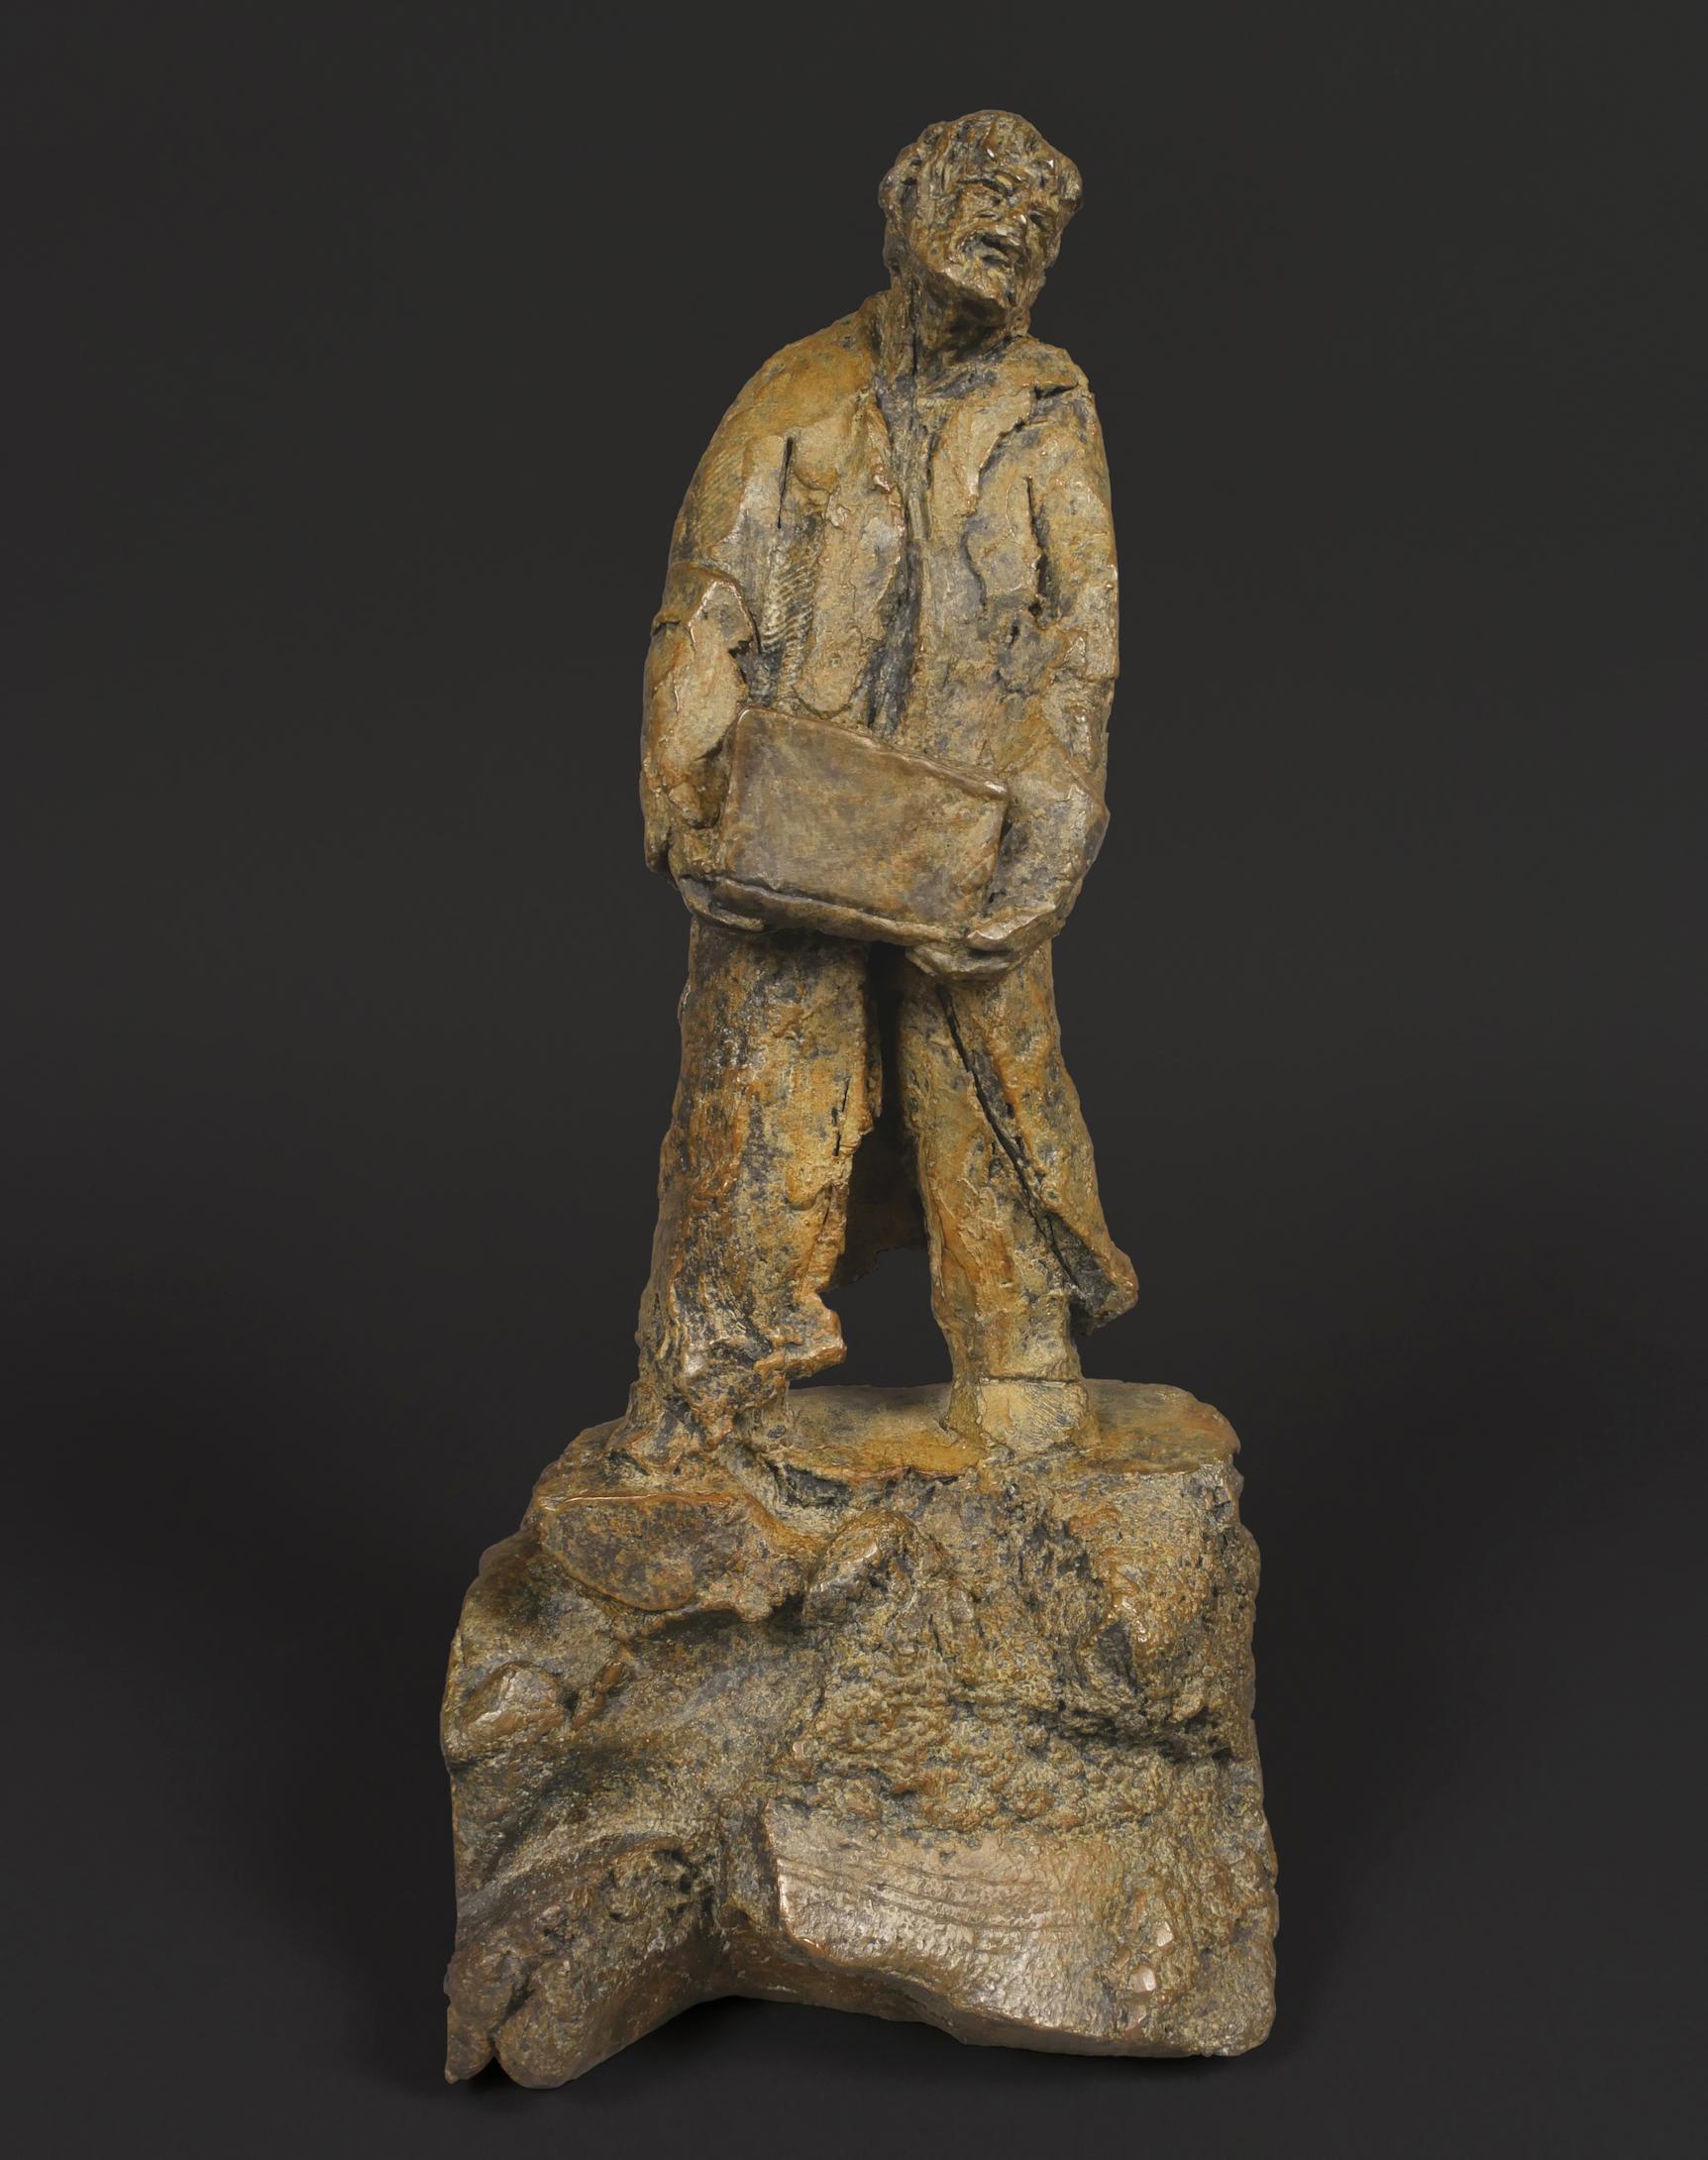 Frank Girard Figurative Art - "The Witness", Man Rooted on the Earth Looking Toward Horizon, Bronze Sculpture